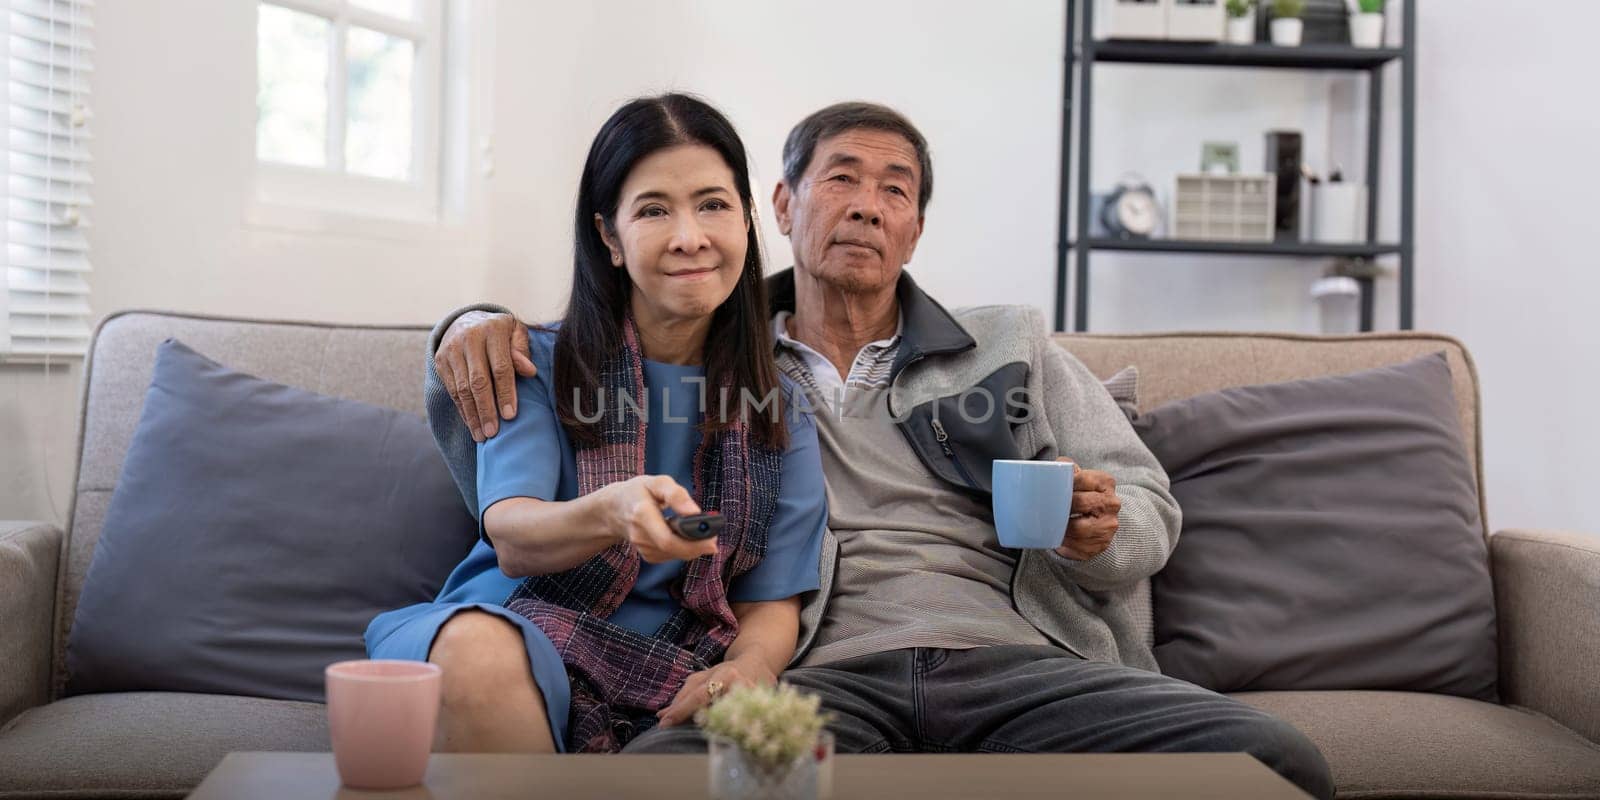 Senior couple watching tv and sofa in relax for movie or series in living room at home. Elderly man and woman with coffee and remote together for changing channel and online entertainment.